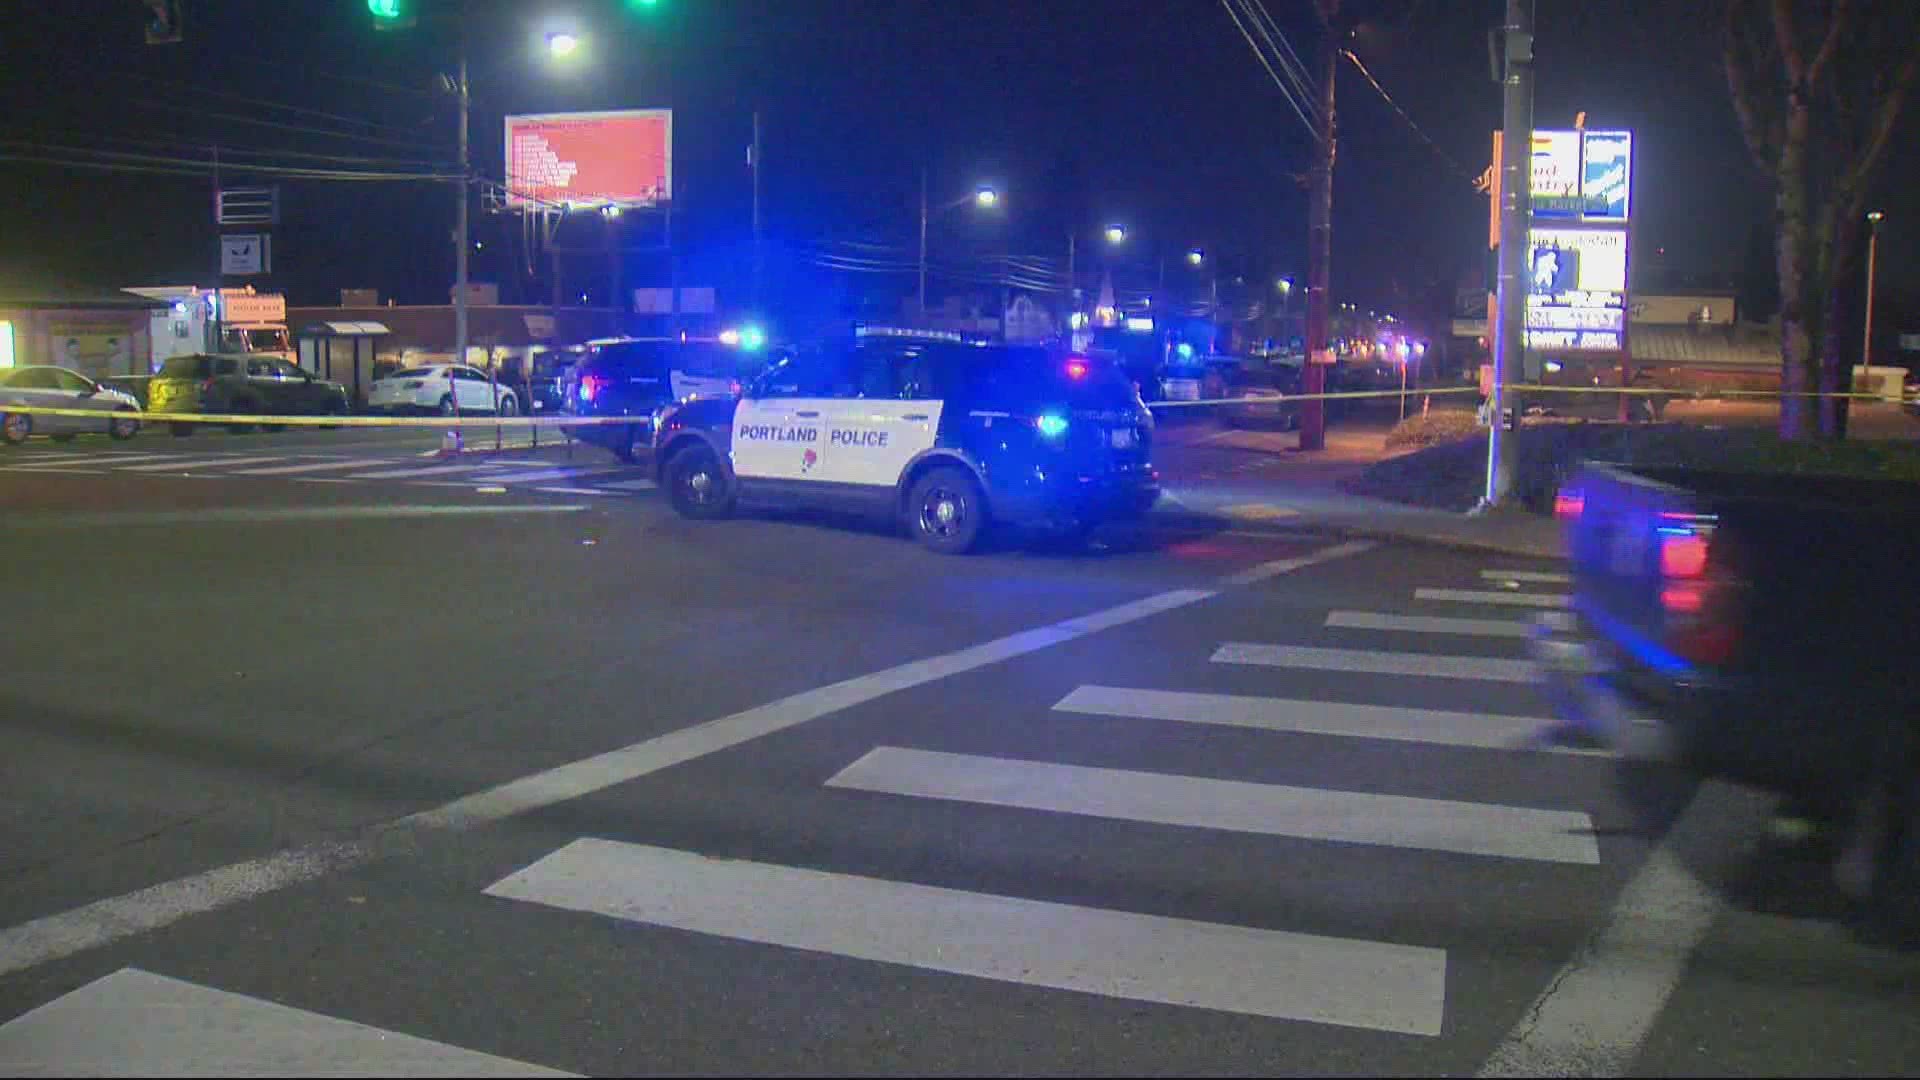 More violence on Portland streets. Three people died in separate incidents overnight. As Morgan Romero reports, police say the violence is overwhelming.